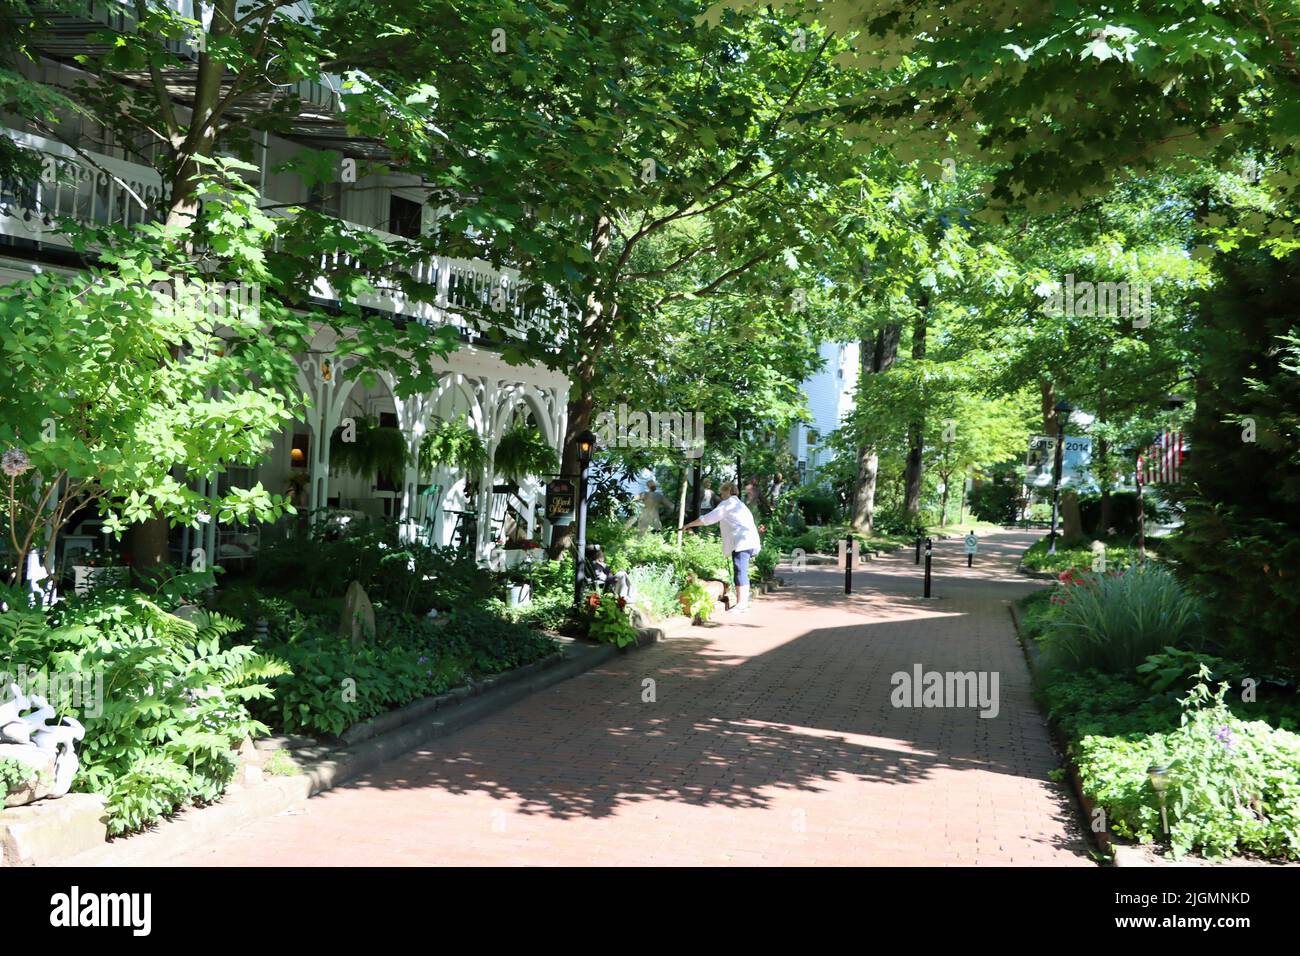 Woman watering front garden of her house on Ramble avenue in Chautauqua Institution area in Chautauqua. New York State. Stock Photo